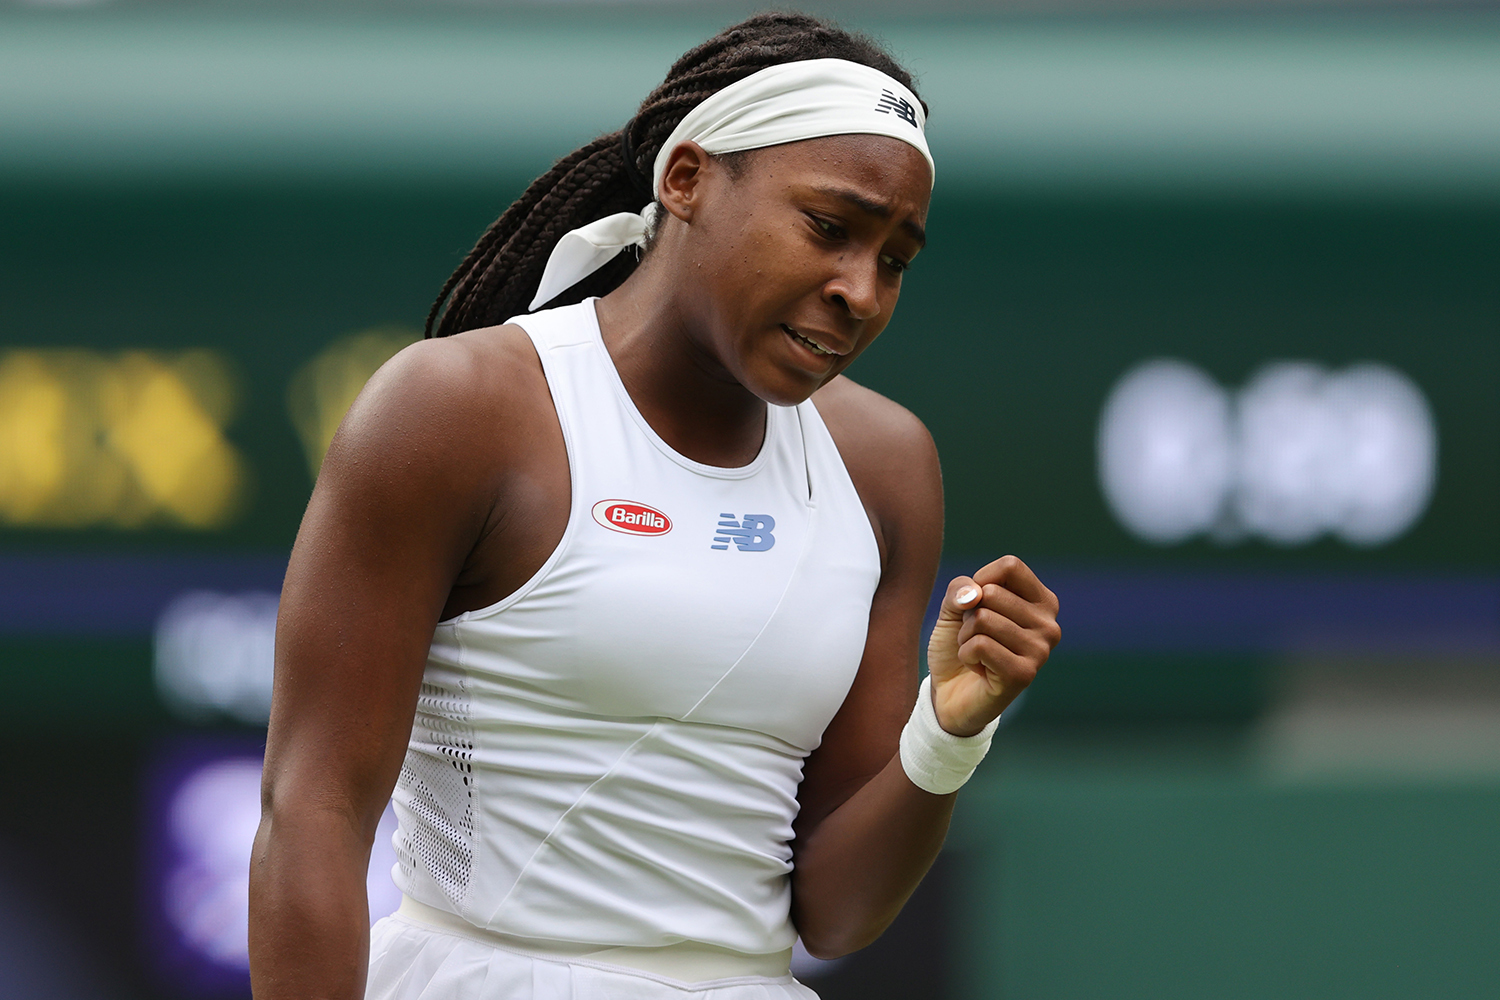 Tennis star Coco Gauff, 17, shares her disappointment after she tests